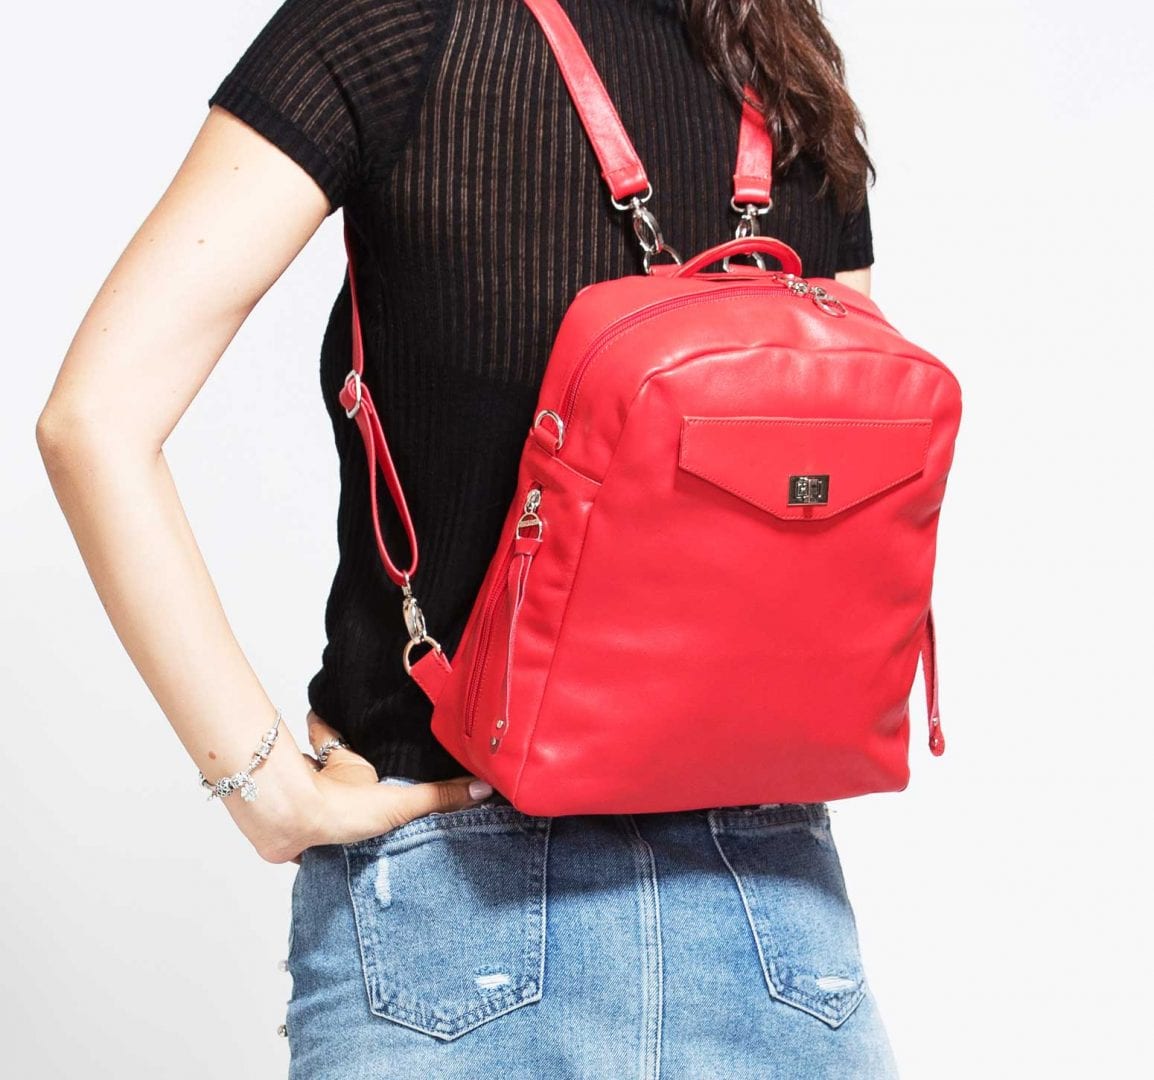 Small Red Leather Backpack | 3-Way Bag